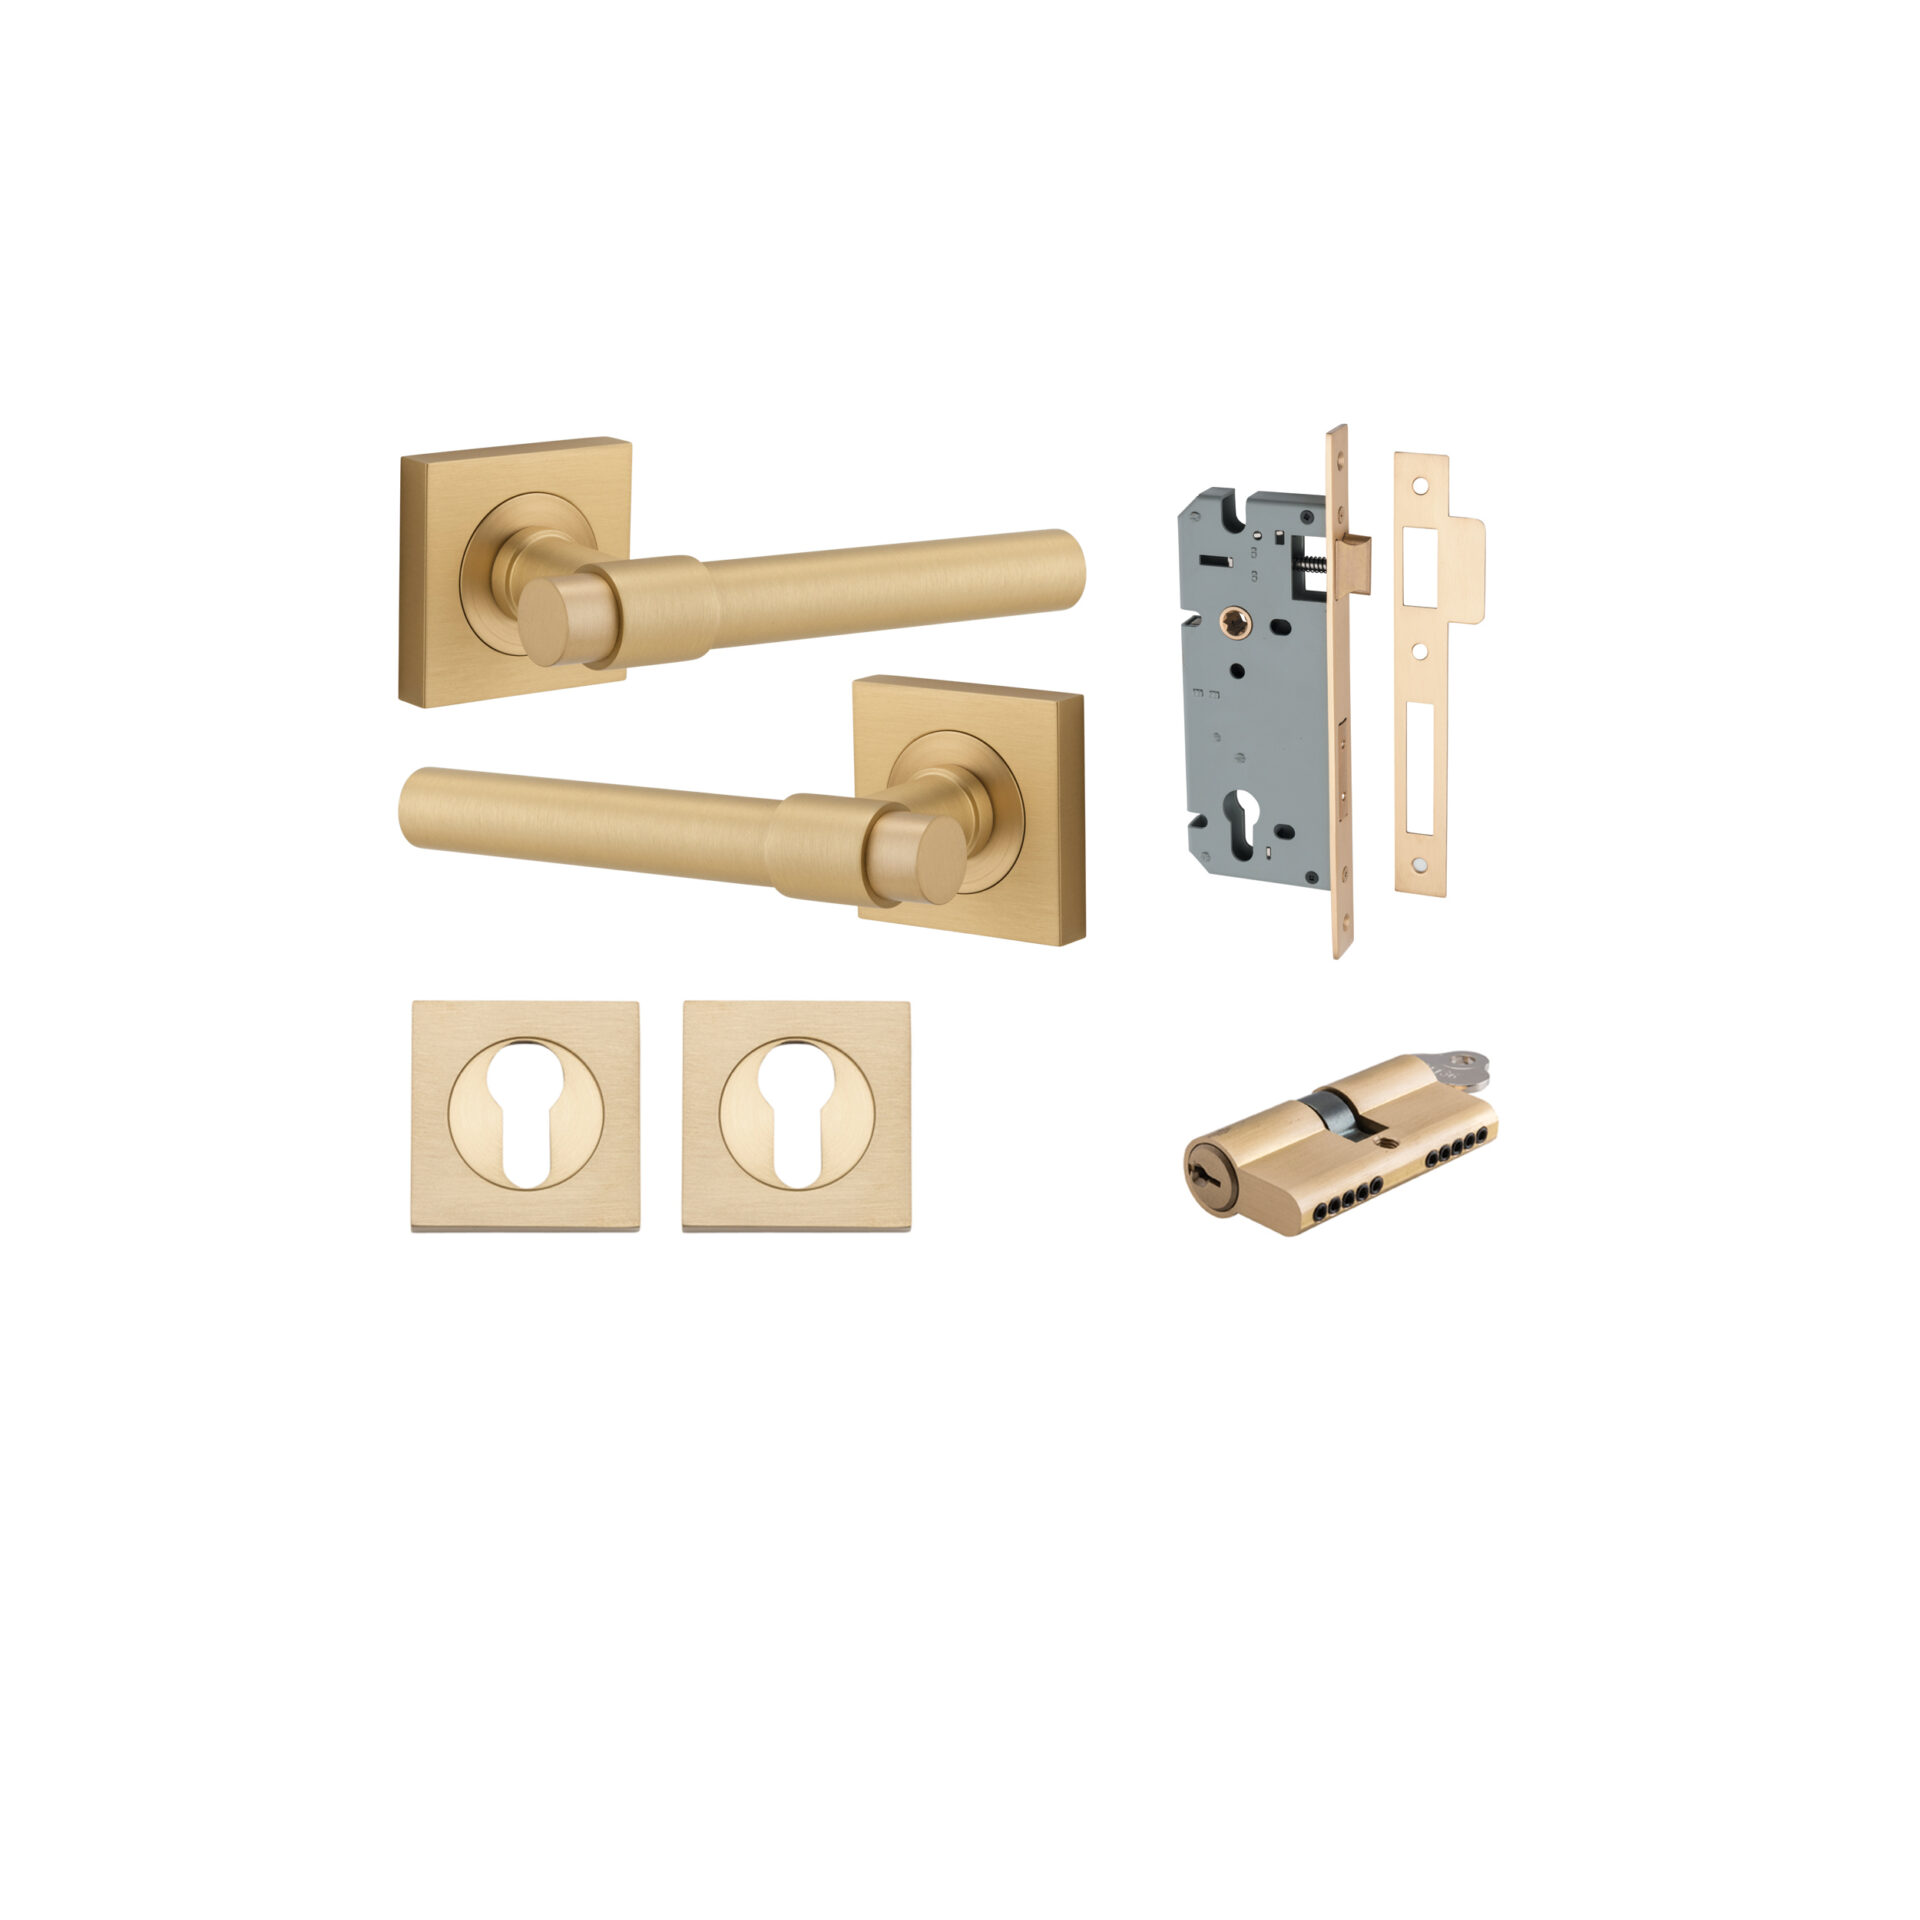 Helsinki Lever - Square Rose Entrance Kit with Separate High Security Lock